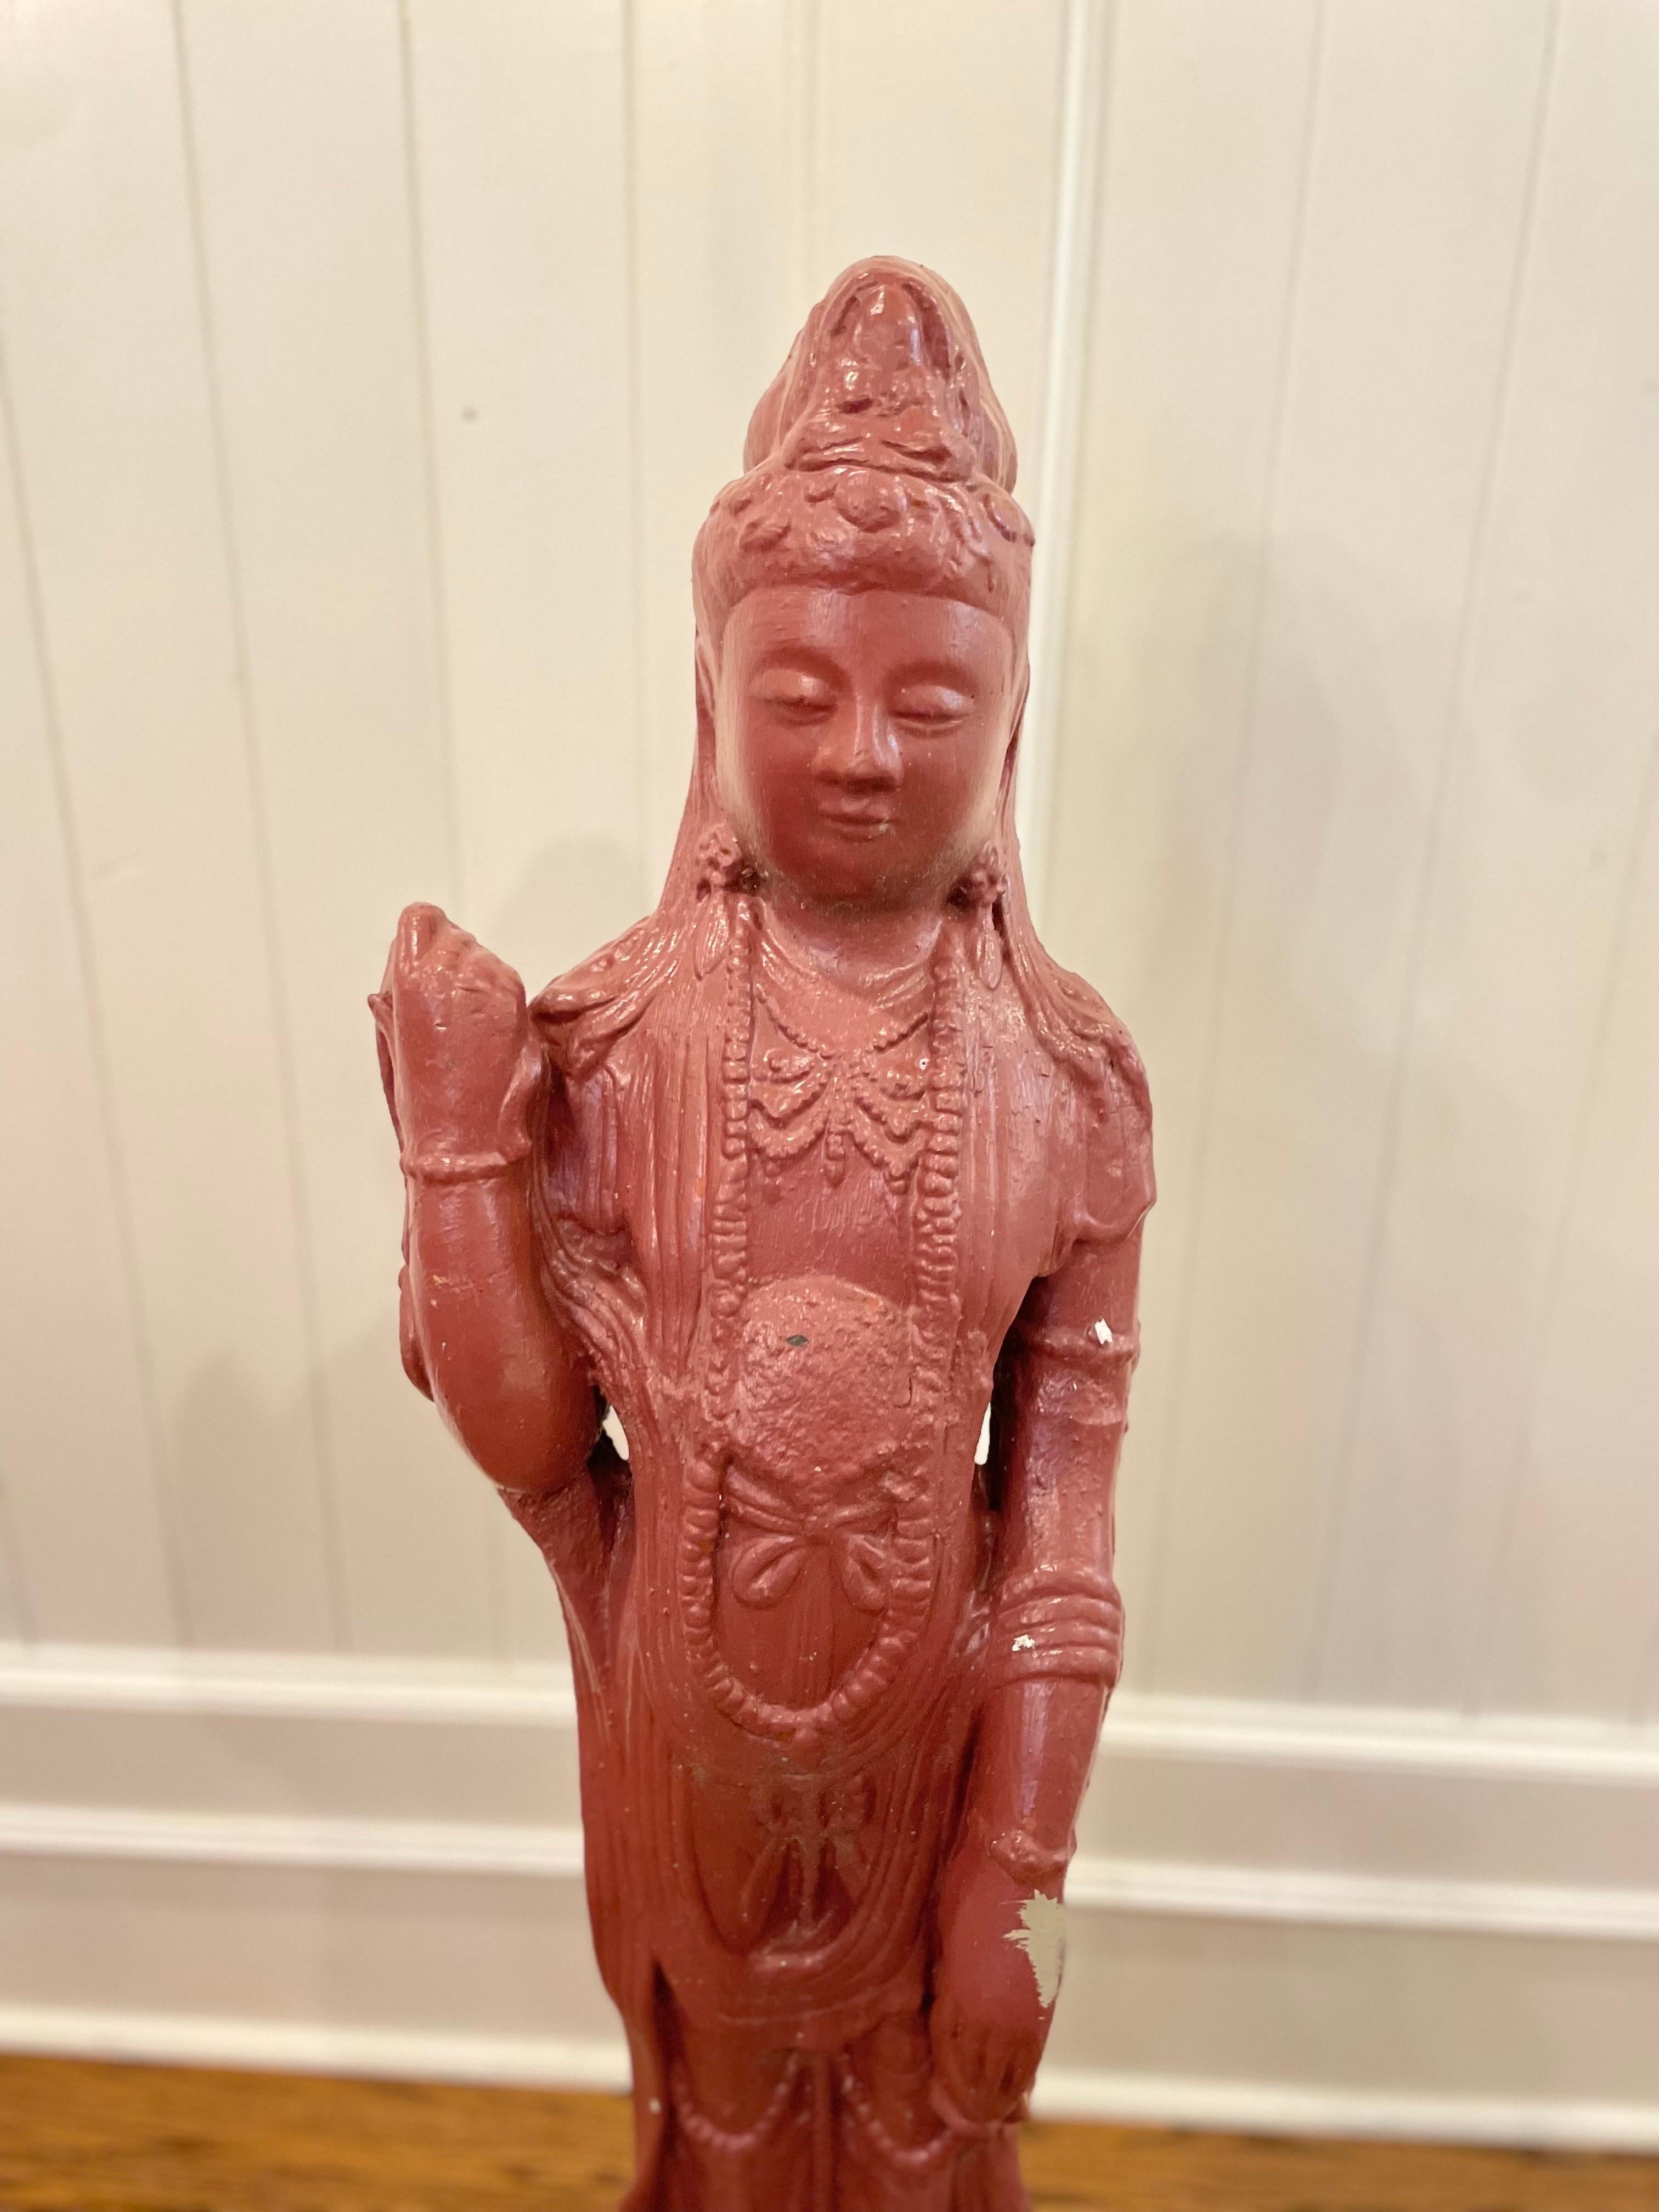 Vintage Kwan Guan Yin Cement Garden Statue
Very detailed
Gorgeous color 
Heavy cement

Sourced from the estate of a Kentucky Doctor with an exquisite perfectly executed Mid Century Home.